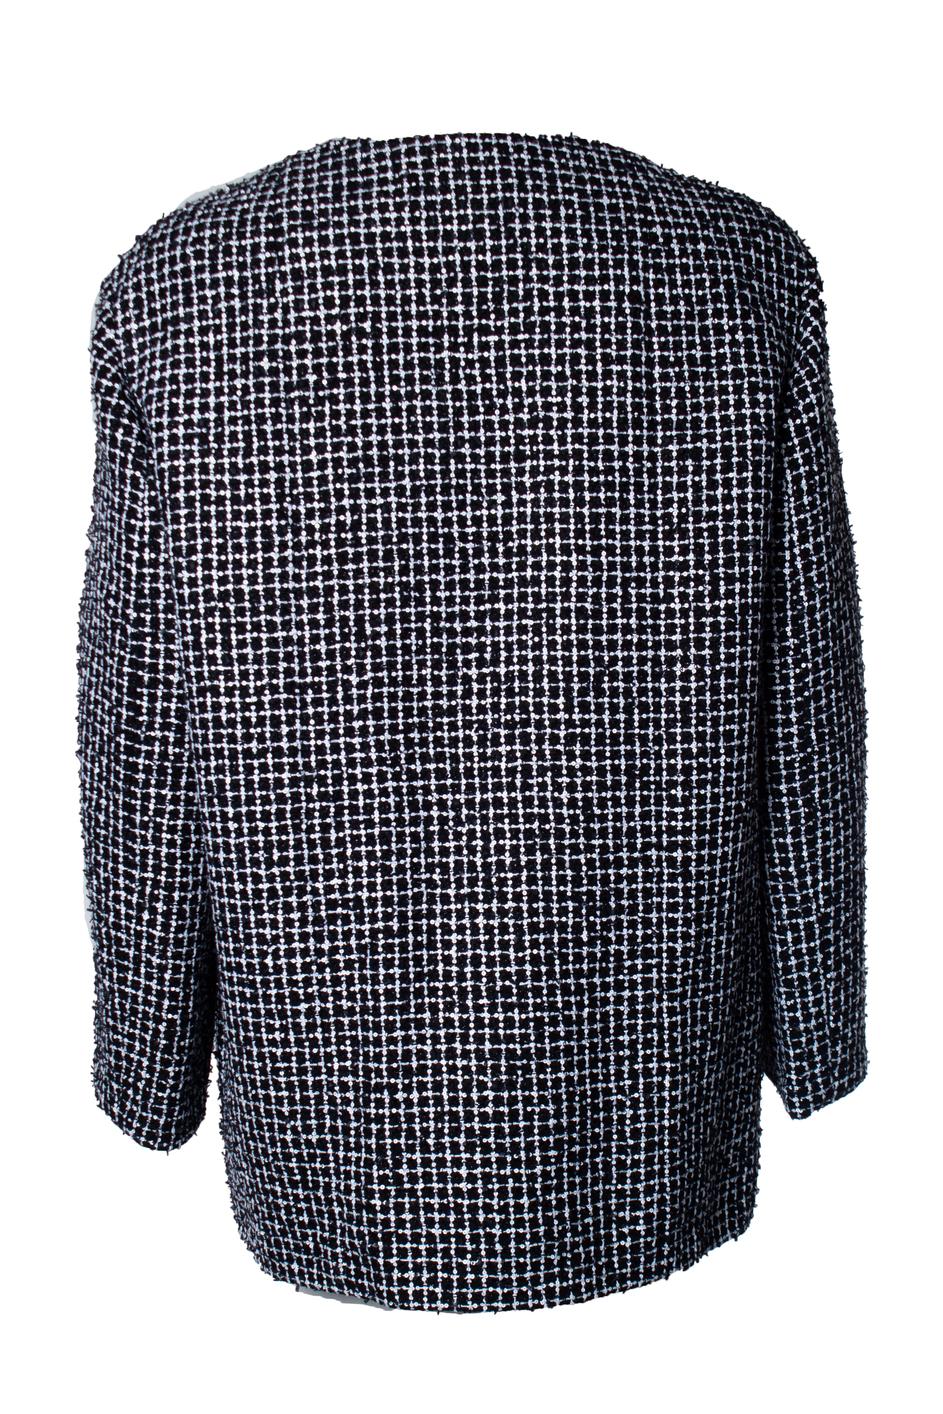 Women's Chanel, 23C Tweed jacket in black and white